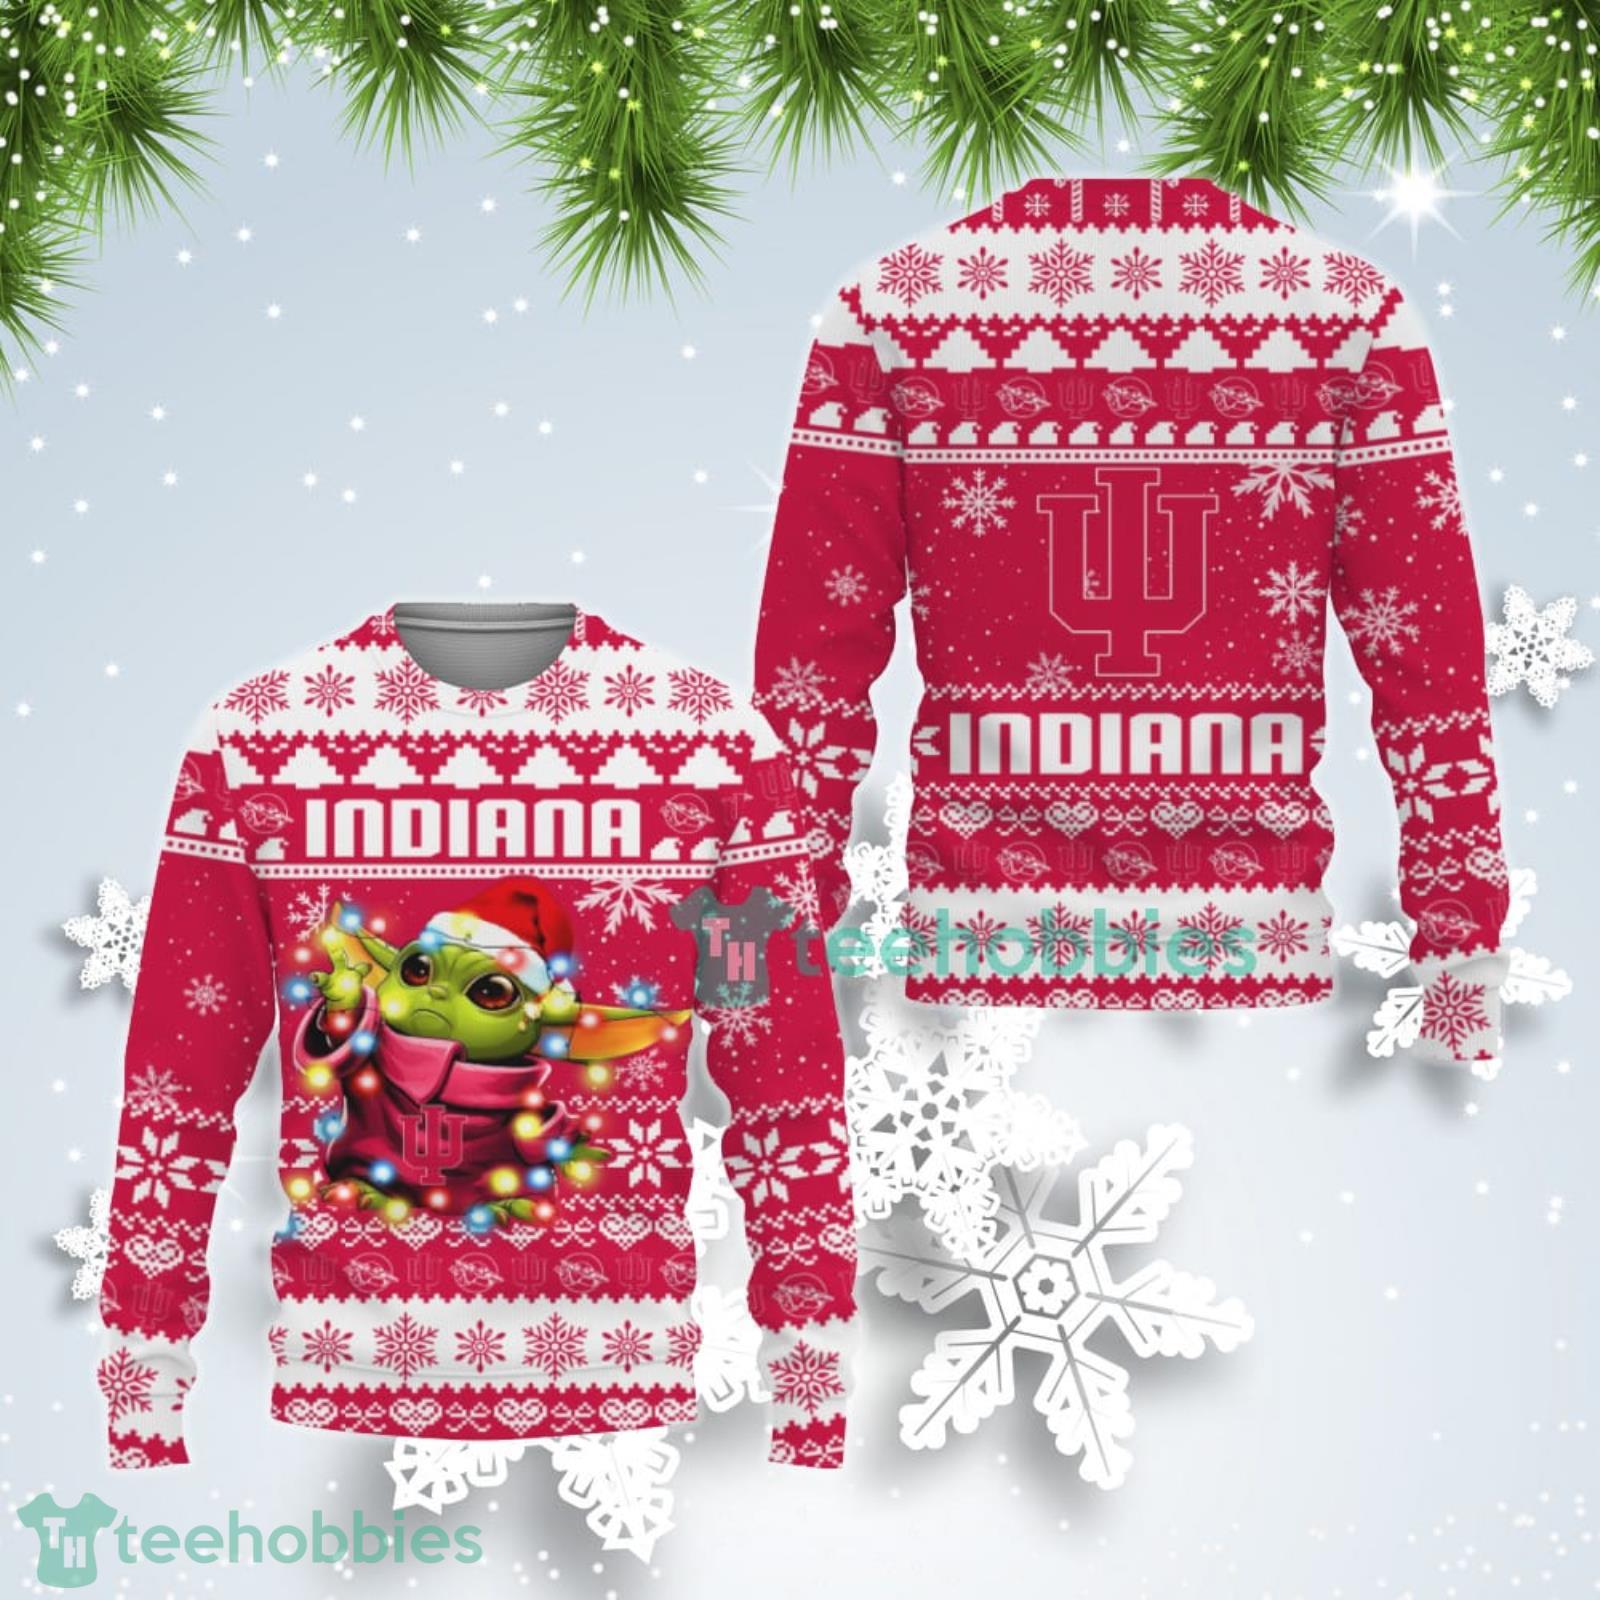 Indiana Hoosiers Cute Baby Yoda Star Wars Ugly Christmas Sweater Product Photo 1